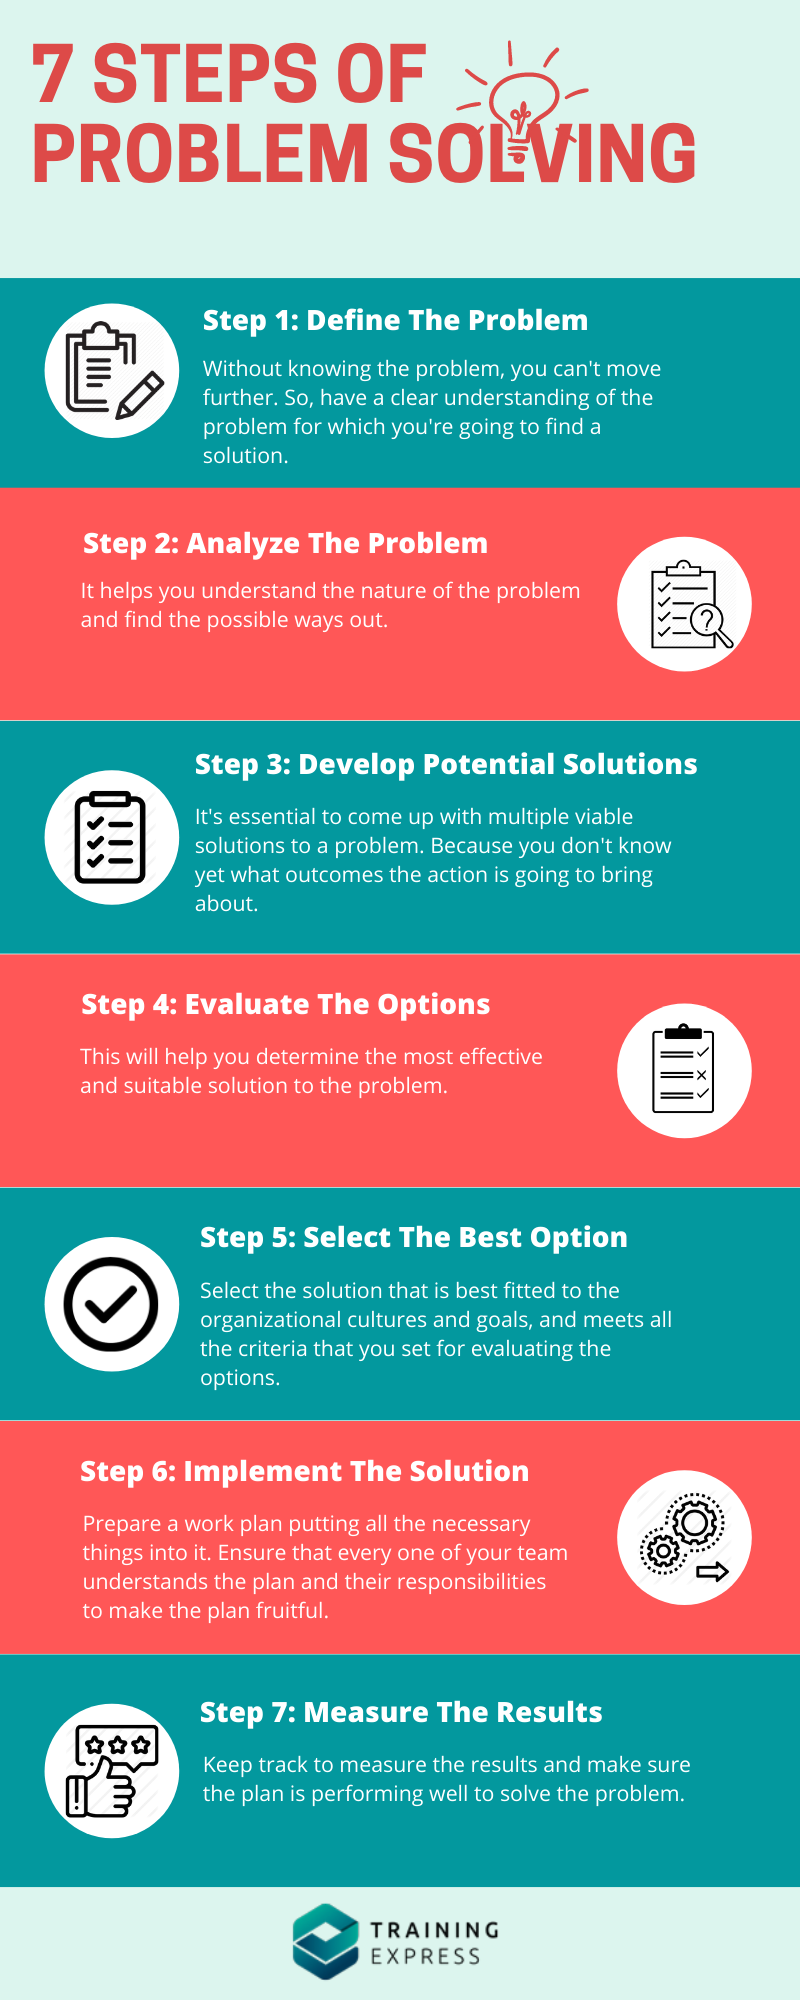 give the six steps of problem solving